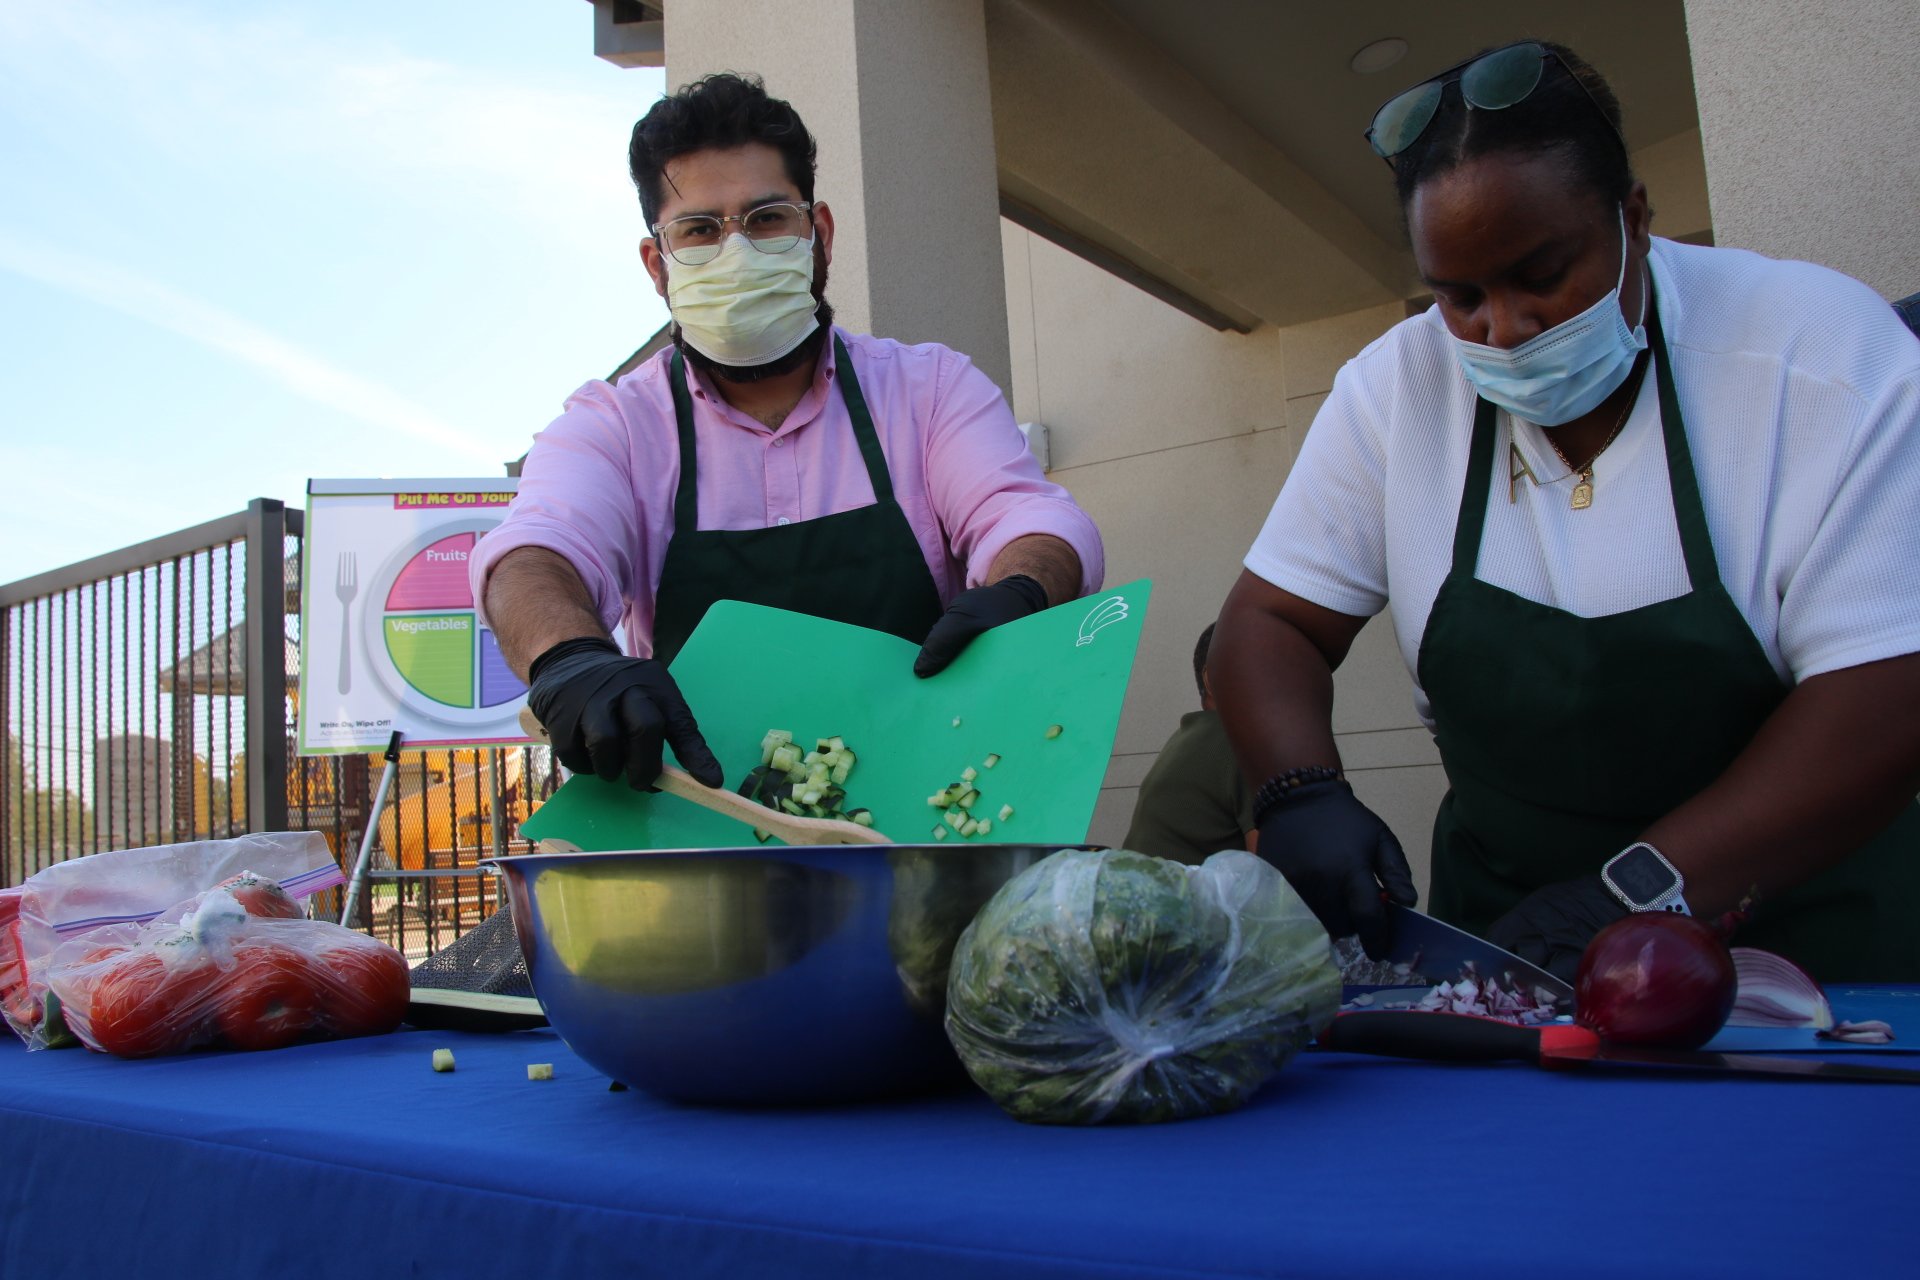 Metro staff cook with locally grown veggies